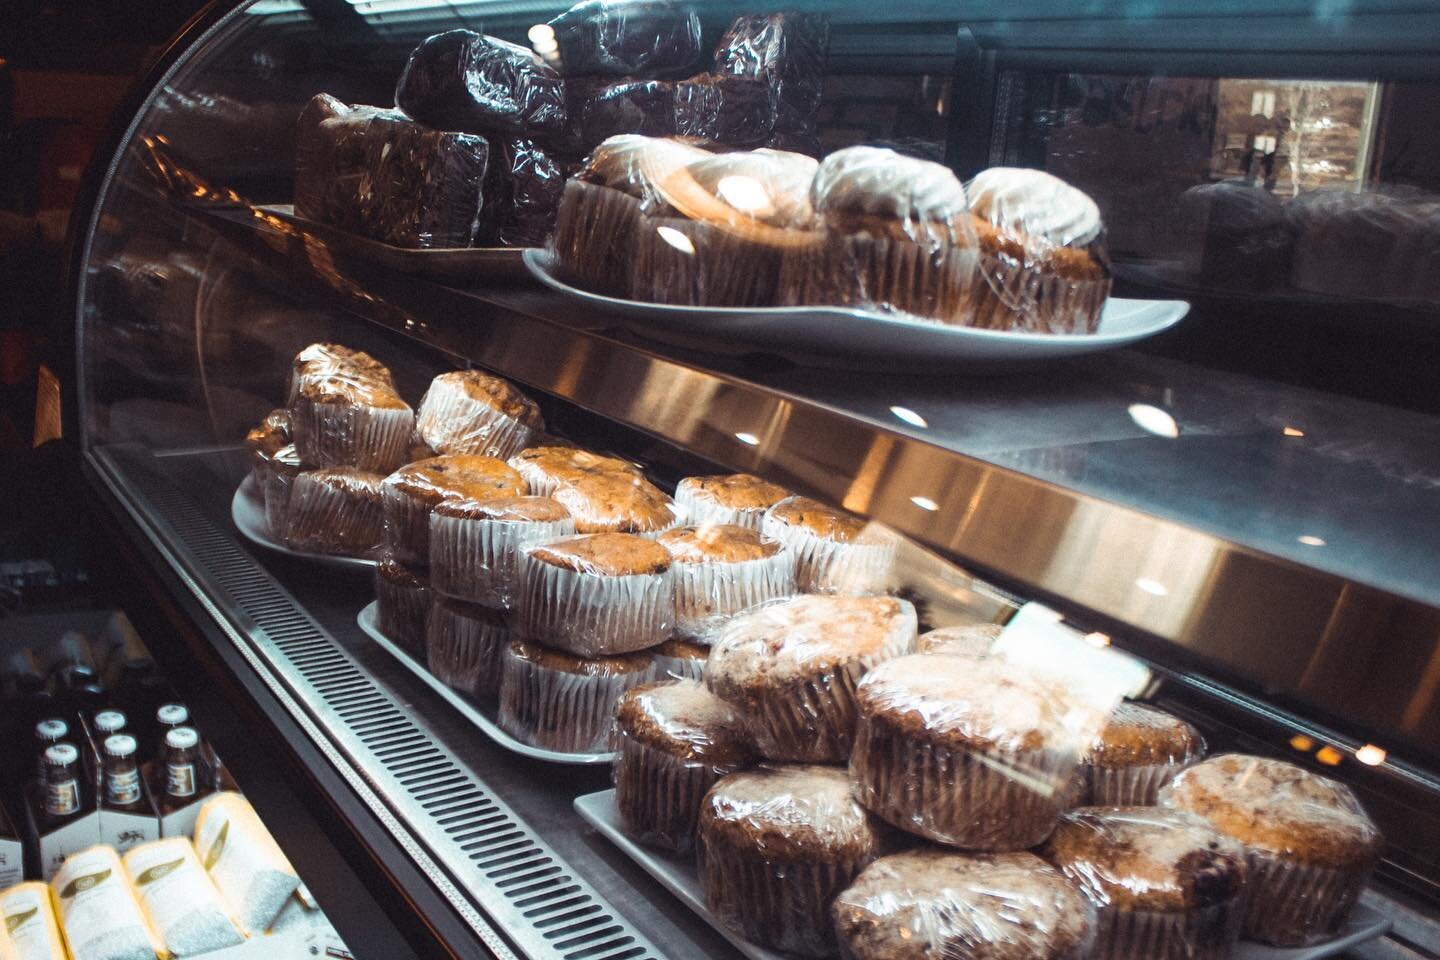 Have you tried our gluten free muffins from @wholetreatsbakery? They fly off of our shelves week after week. Come in and try one. ☀️☕️